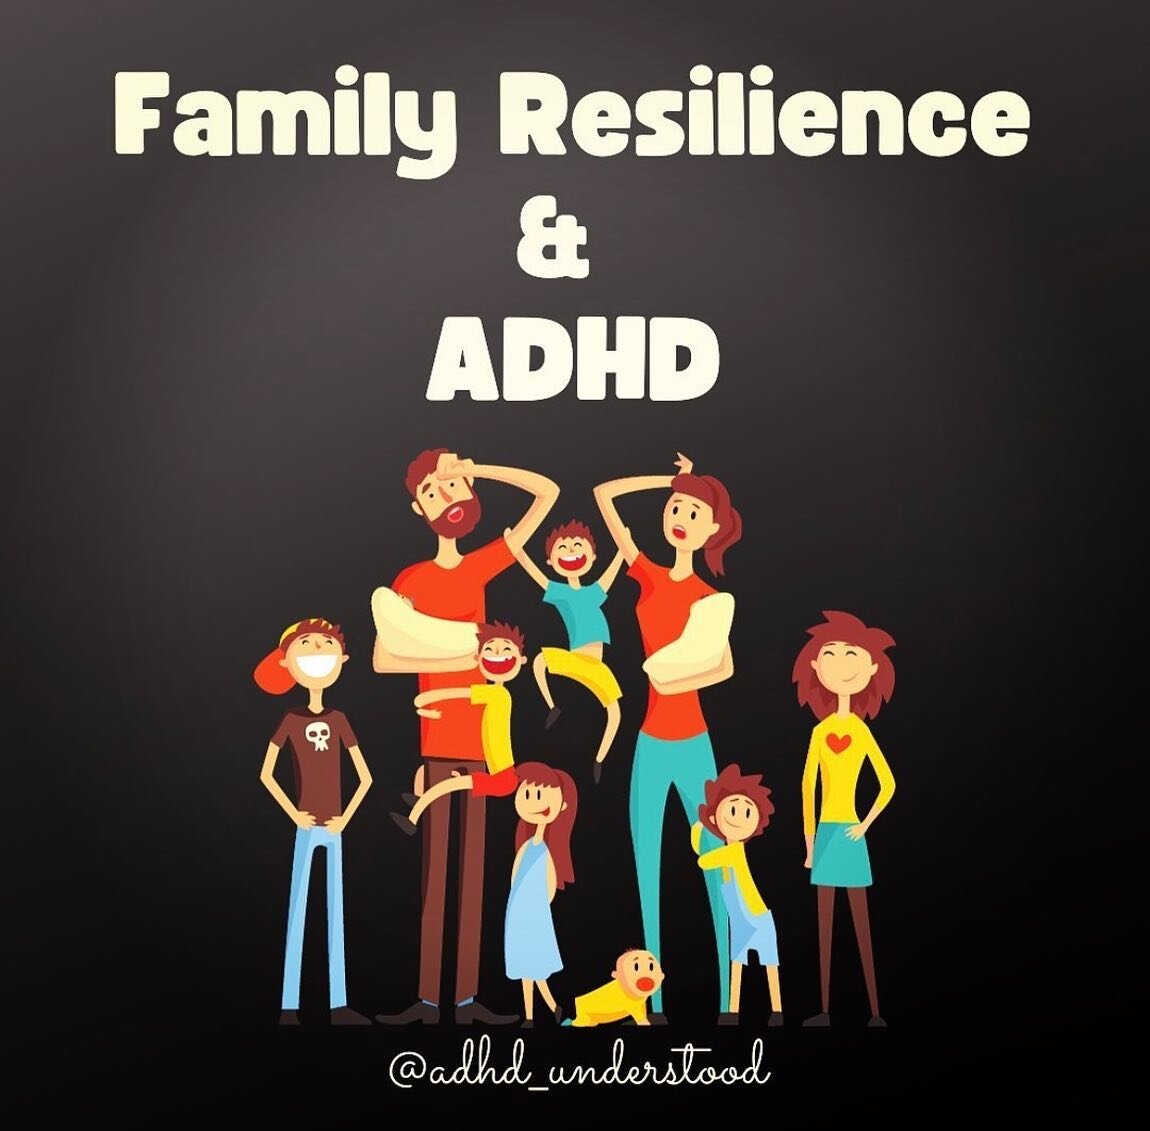 Repost from @adhd_understood 

Family resiliency has a positive impact on children&rsquo;s mental health! 

&bull; &bull;
#vlt4k #adhd #slp #slpa #family #adhdparenting #adhdparents #adhdkids #adhdfamily